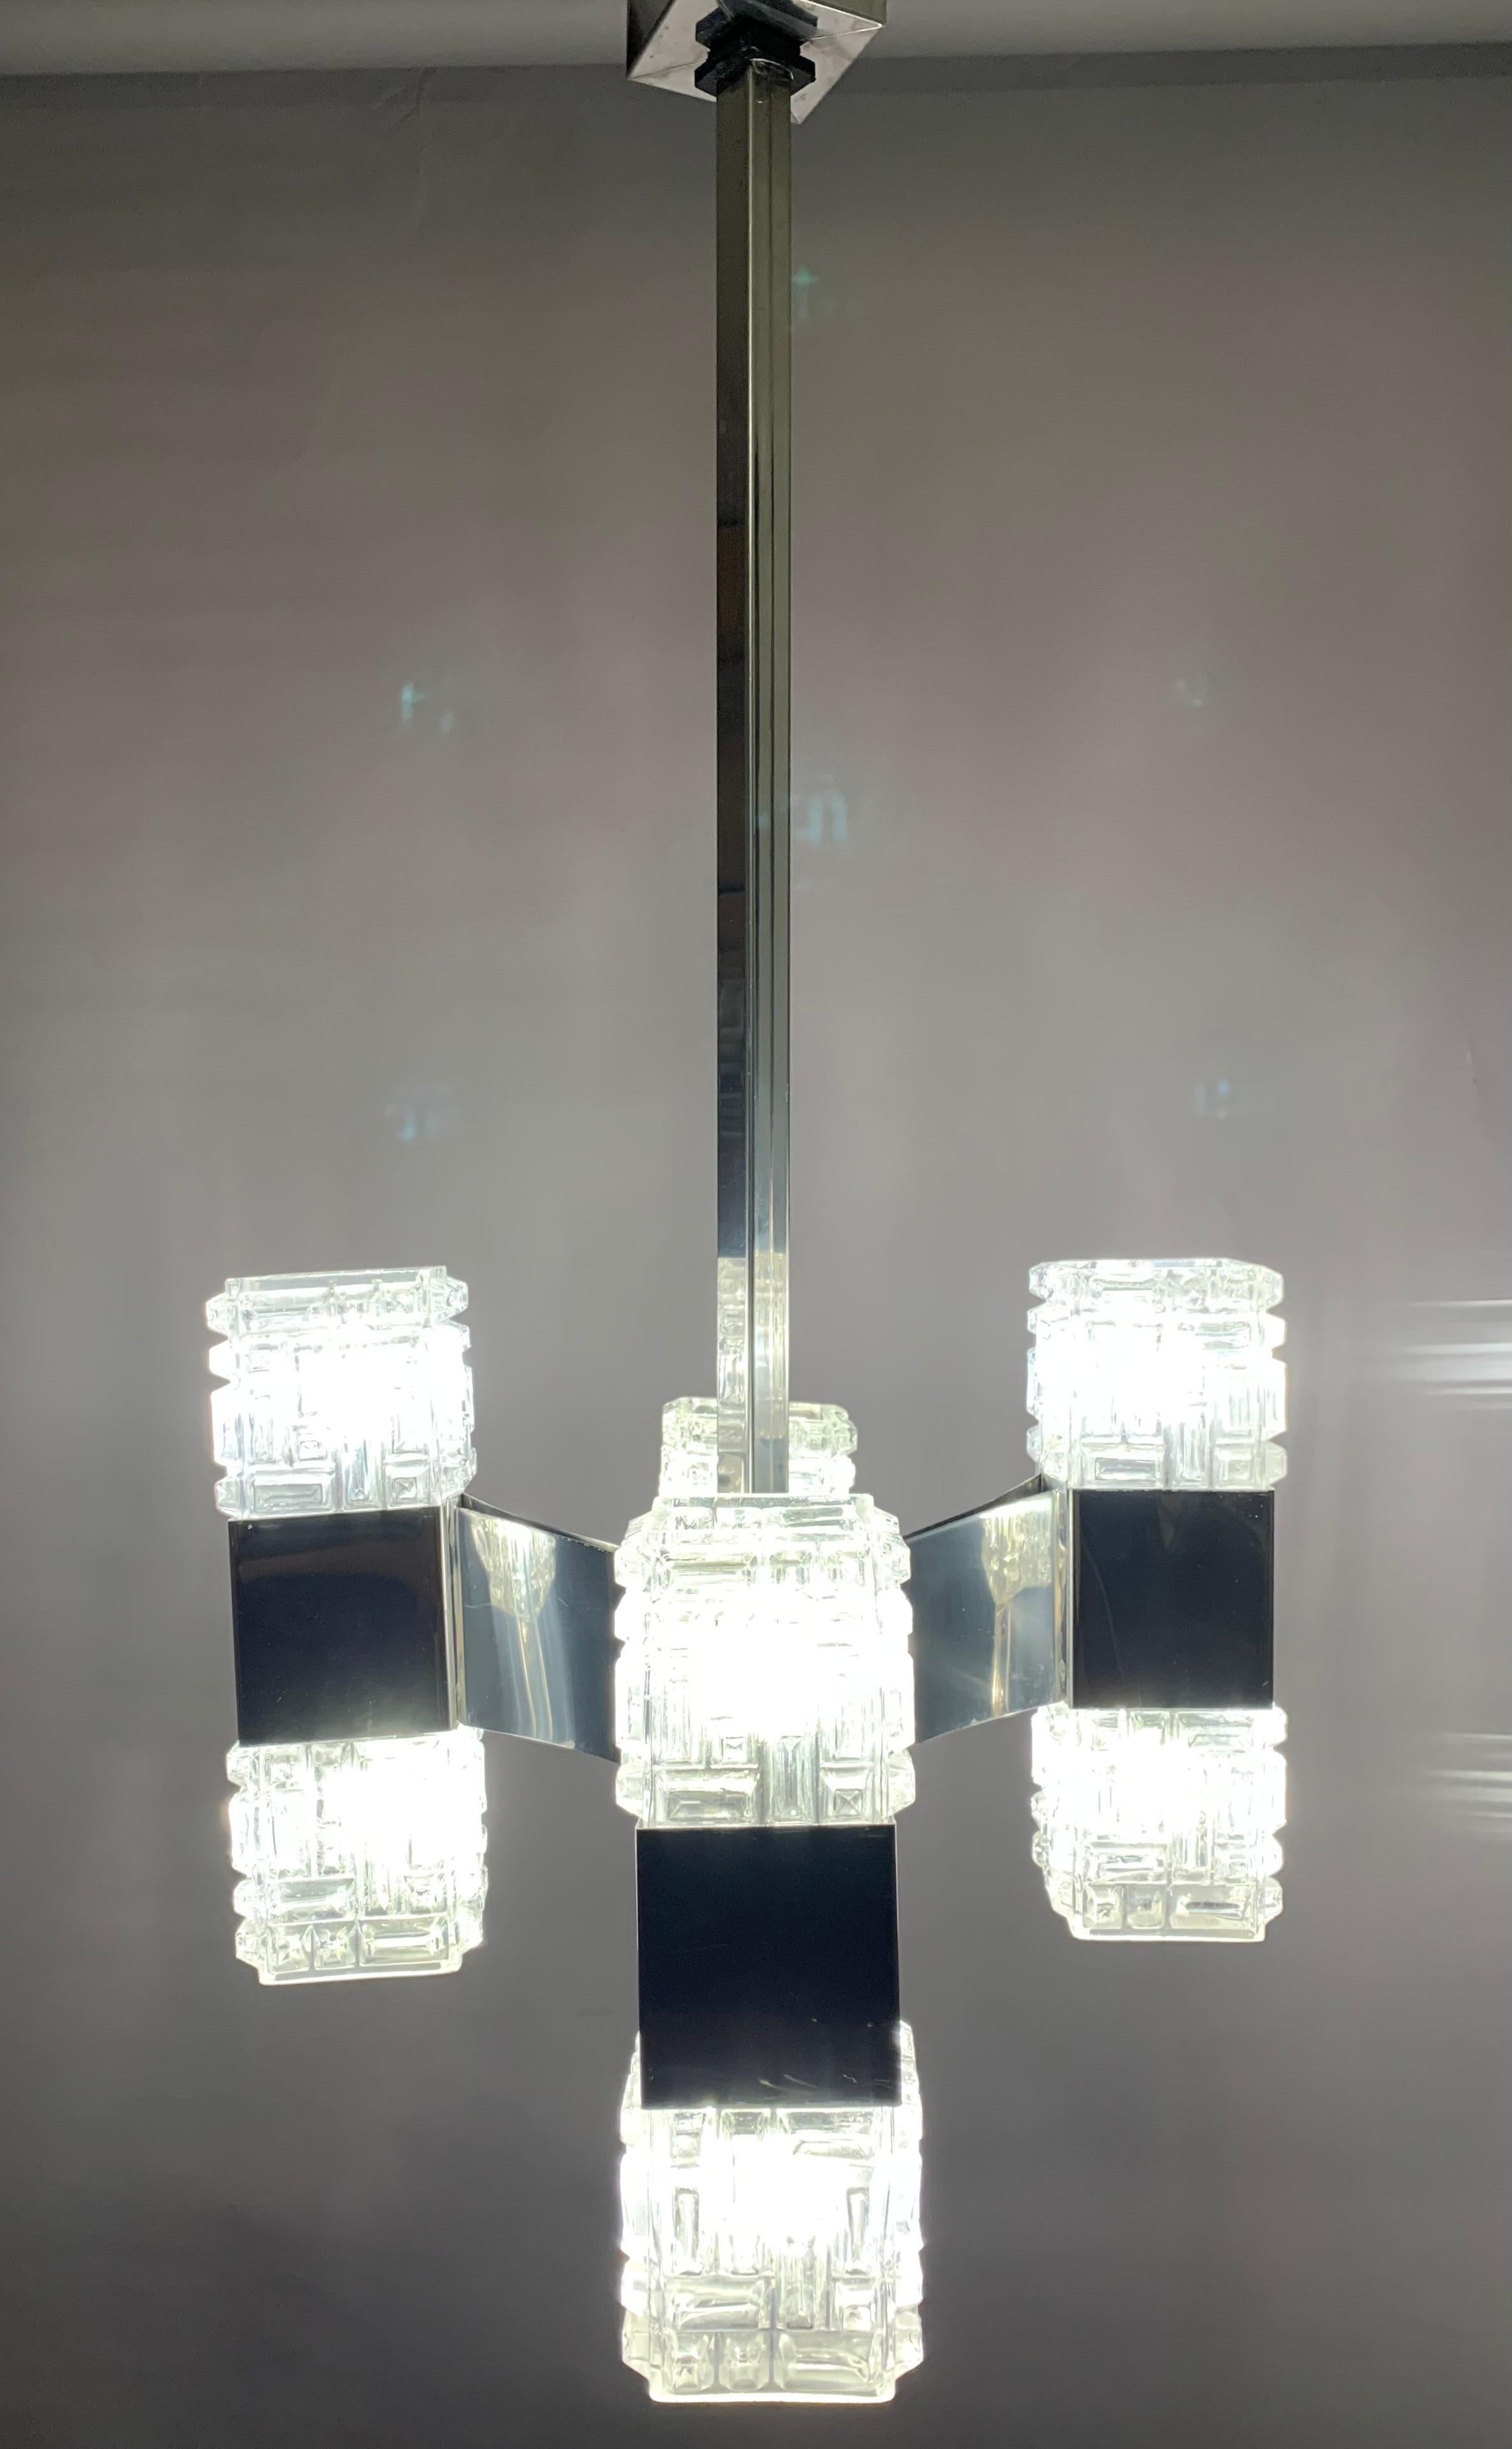 1960s Italian Gaetano Sciolari designed pendant ceiling light with eight square shades - four facing downwards and four upwards. The glass is supported with a polished chrome-plated steel frame which twists towards the supporting sqaure ceiling rod.